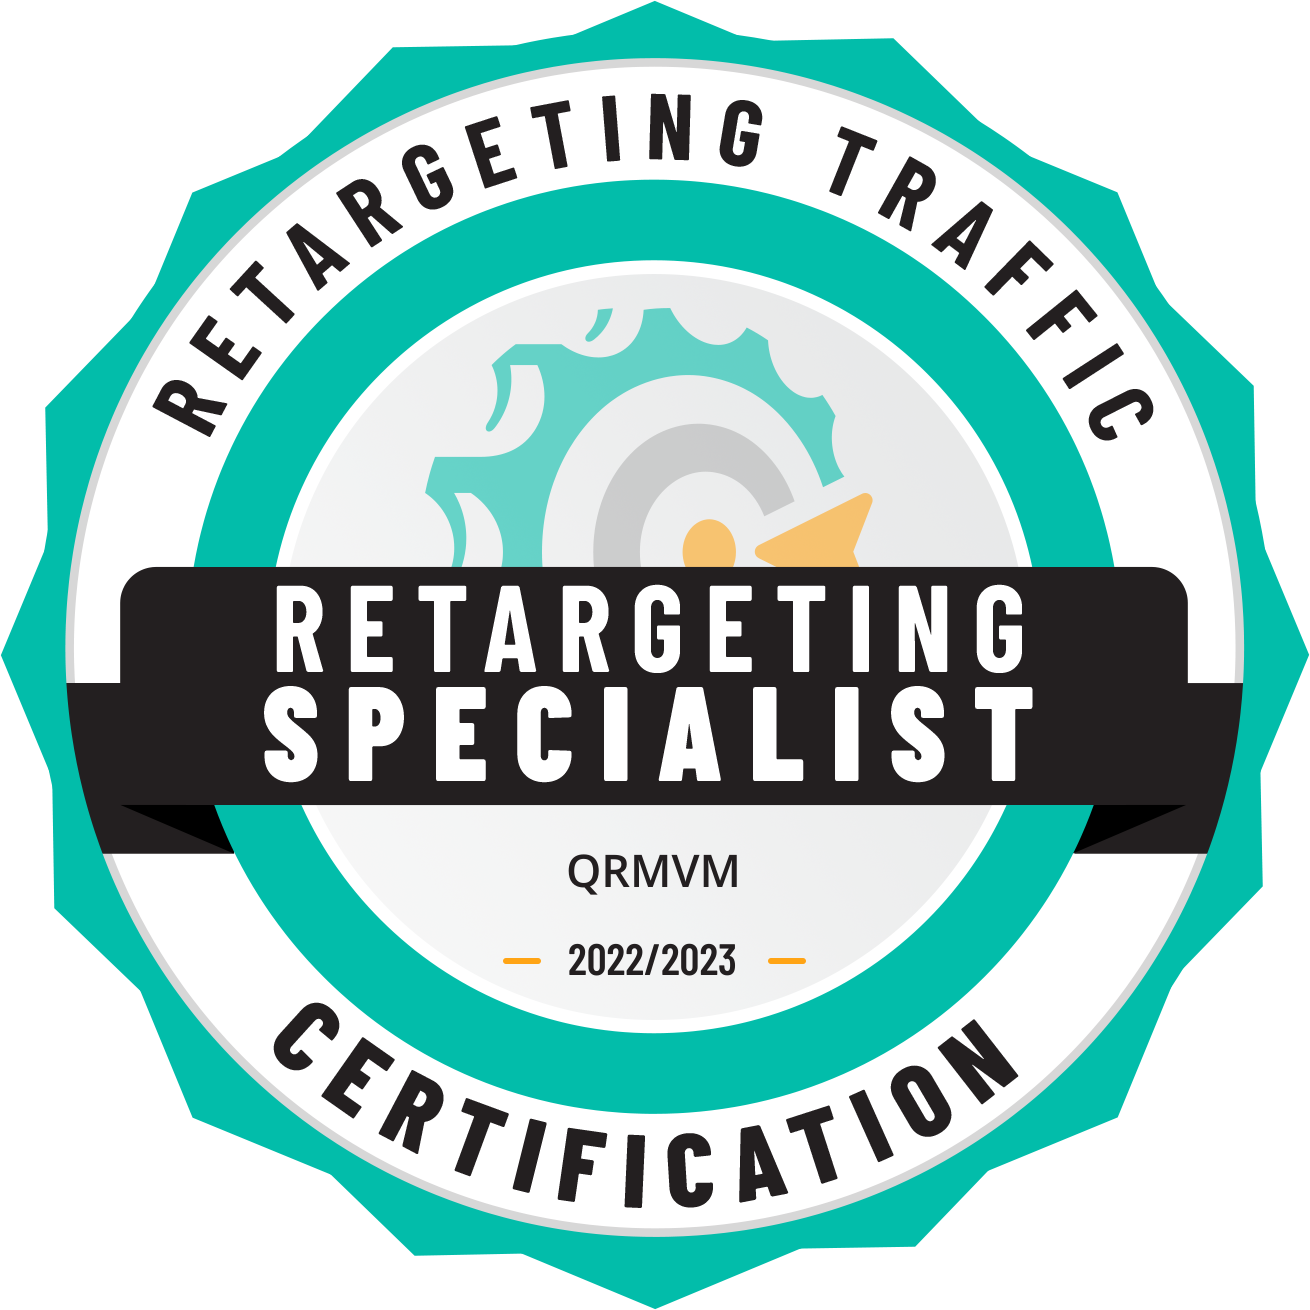 Traffic and Retargeting specialist 